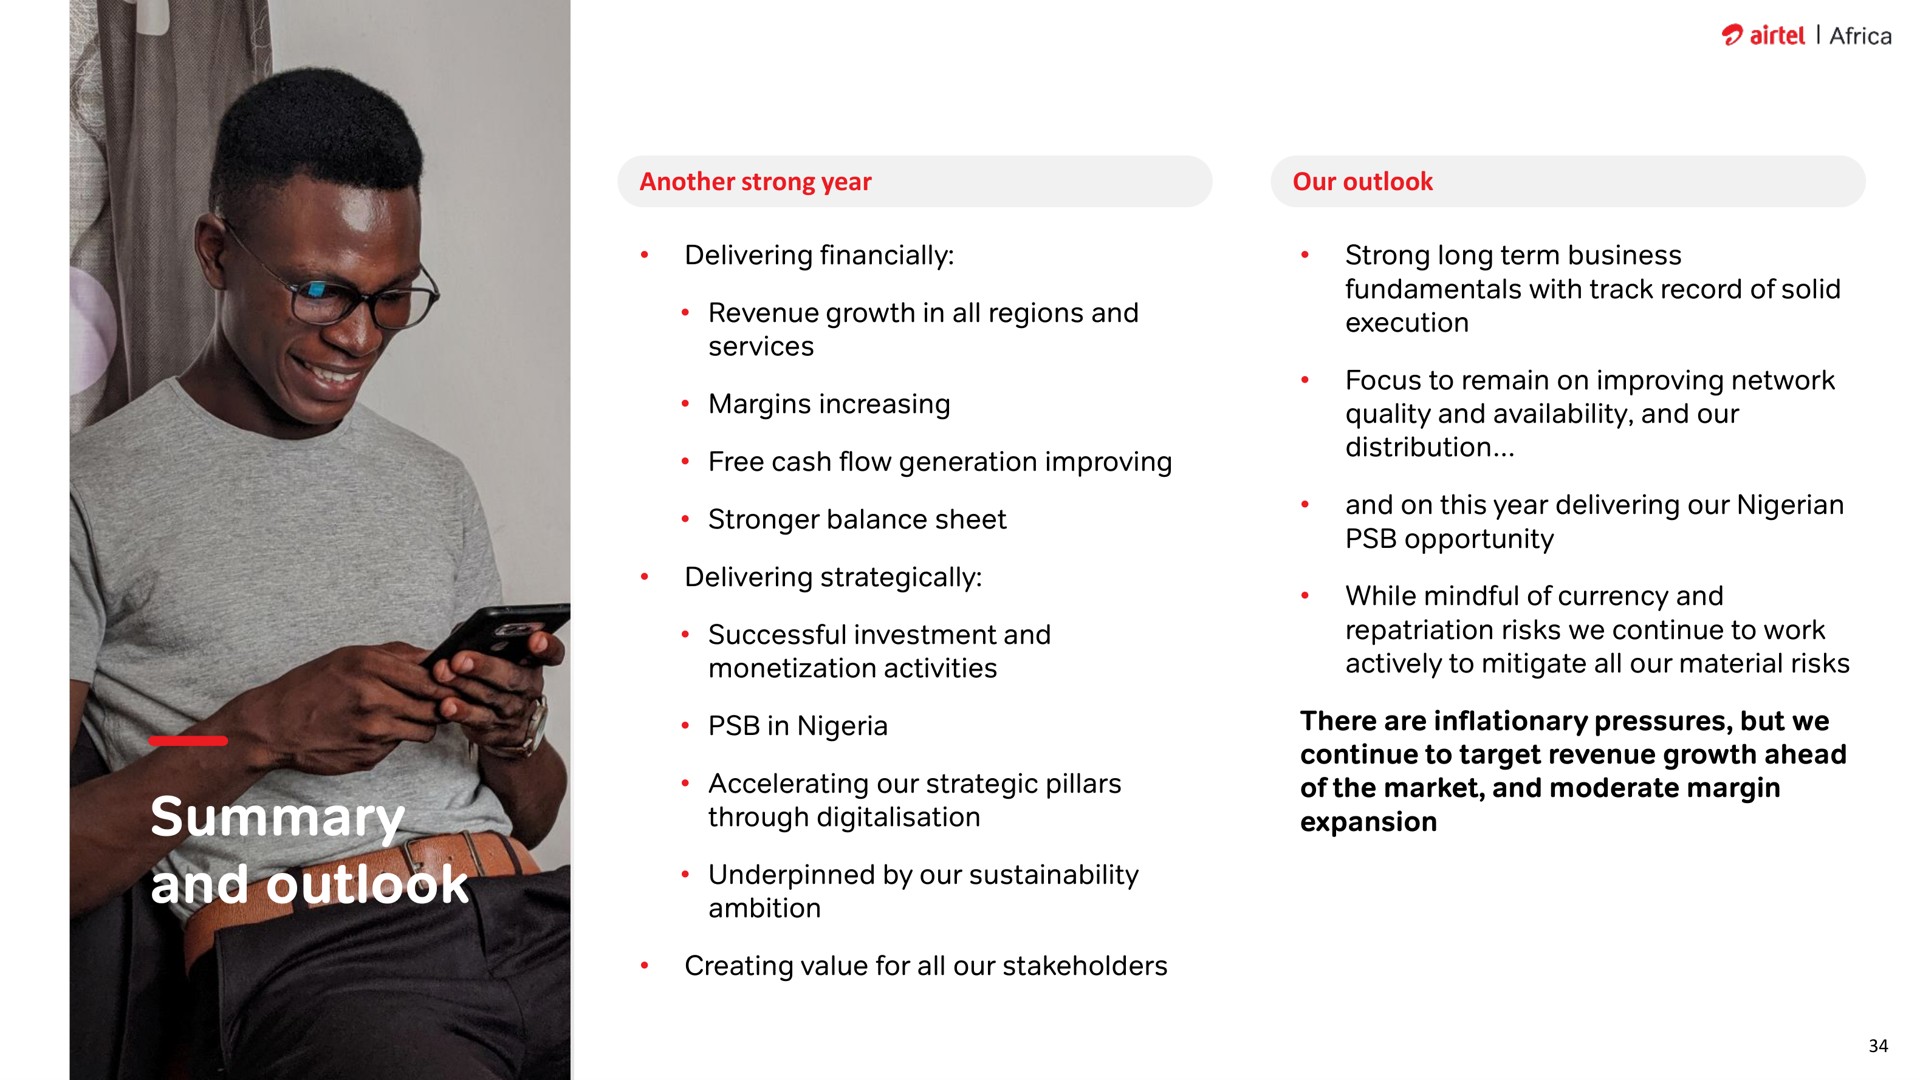 summary and outlook accelerating our strategic pillars of the market moderate margin | Airtel Africa